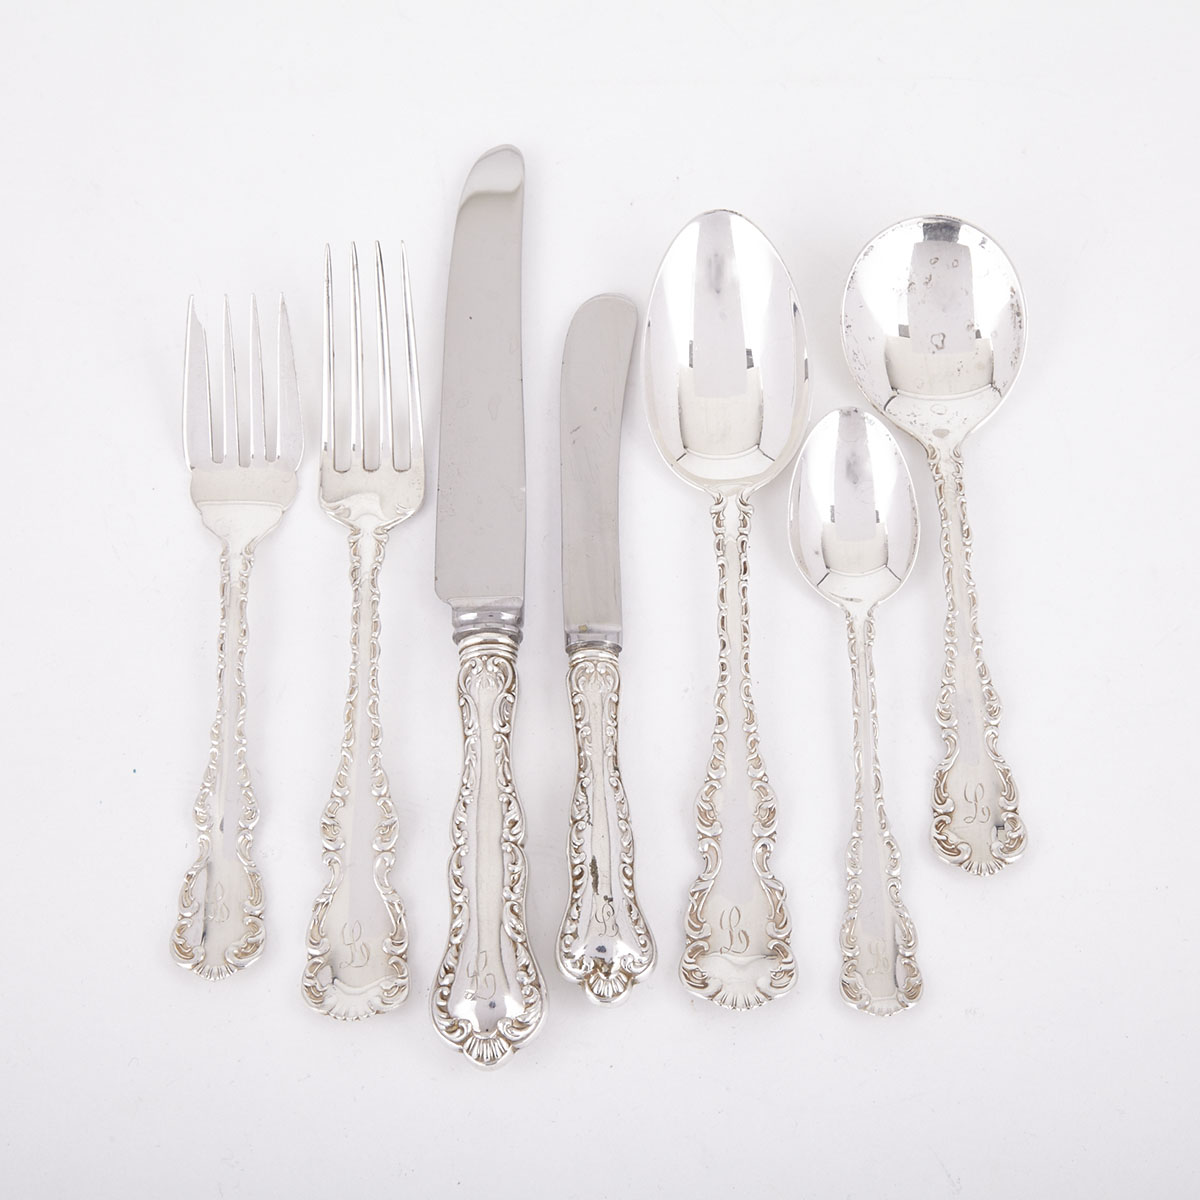 Canadian Silver ‘Louis XV’ Pattern Flatware, Henry Birks & Sons, Montreal, Que., 20th century